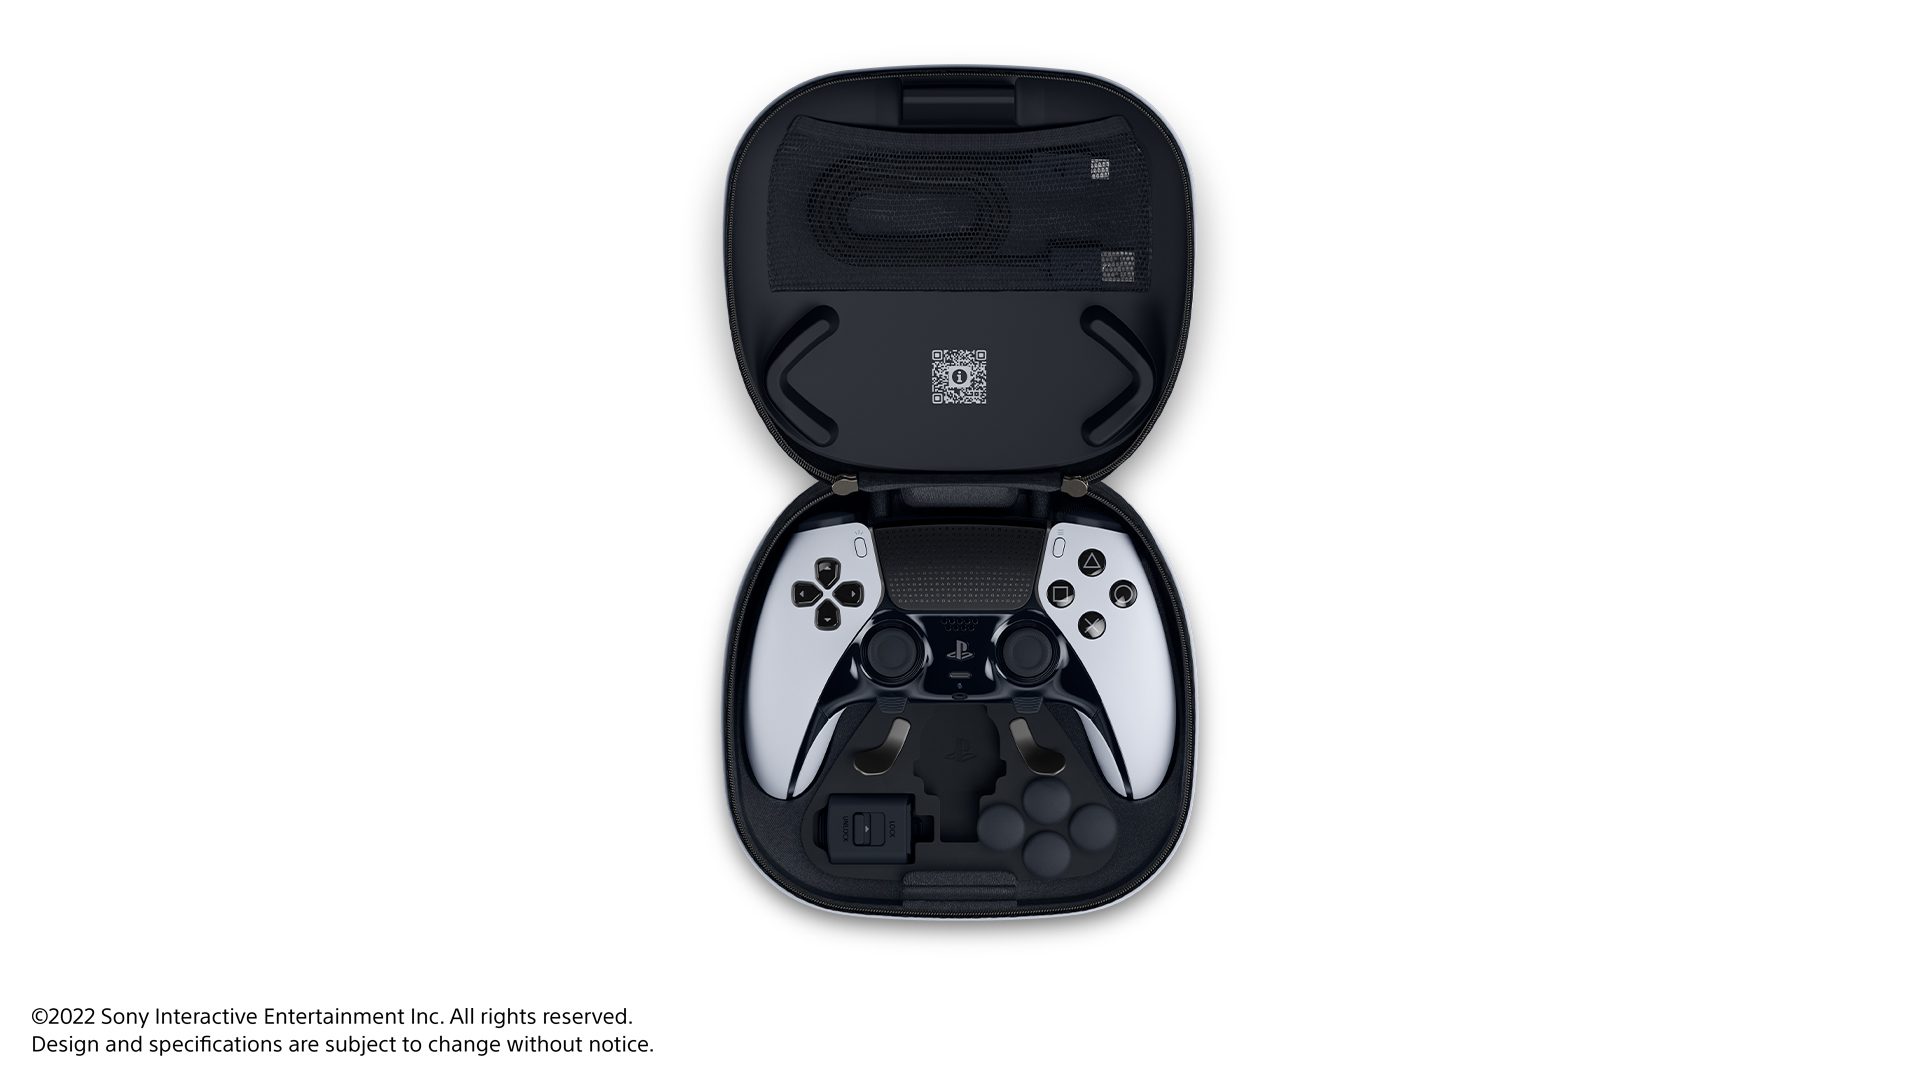 DualSense Edge wireless controller for PS5 launches globally on January 26  – PlayStation.Blog